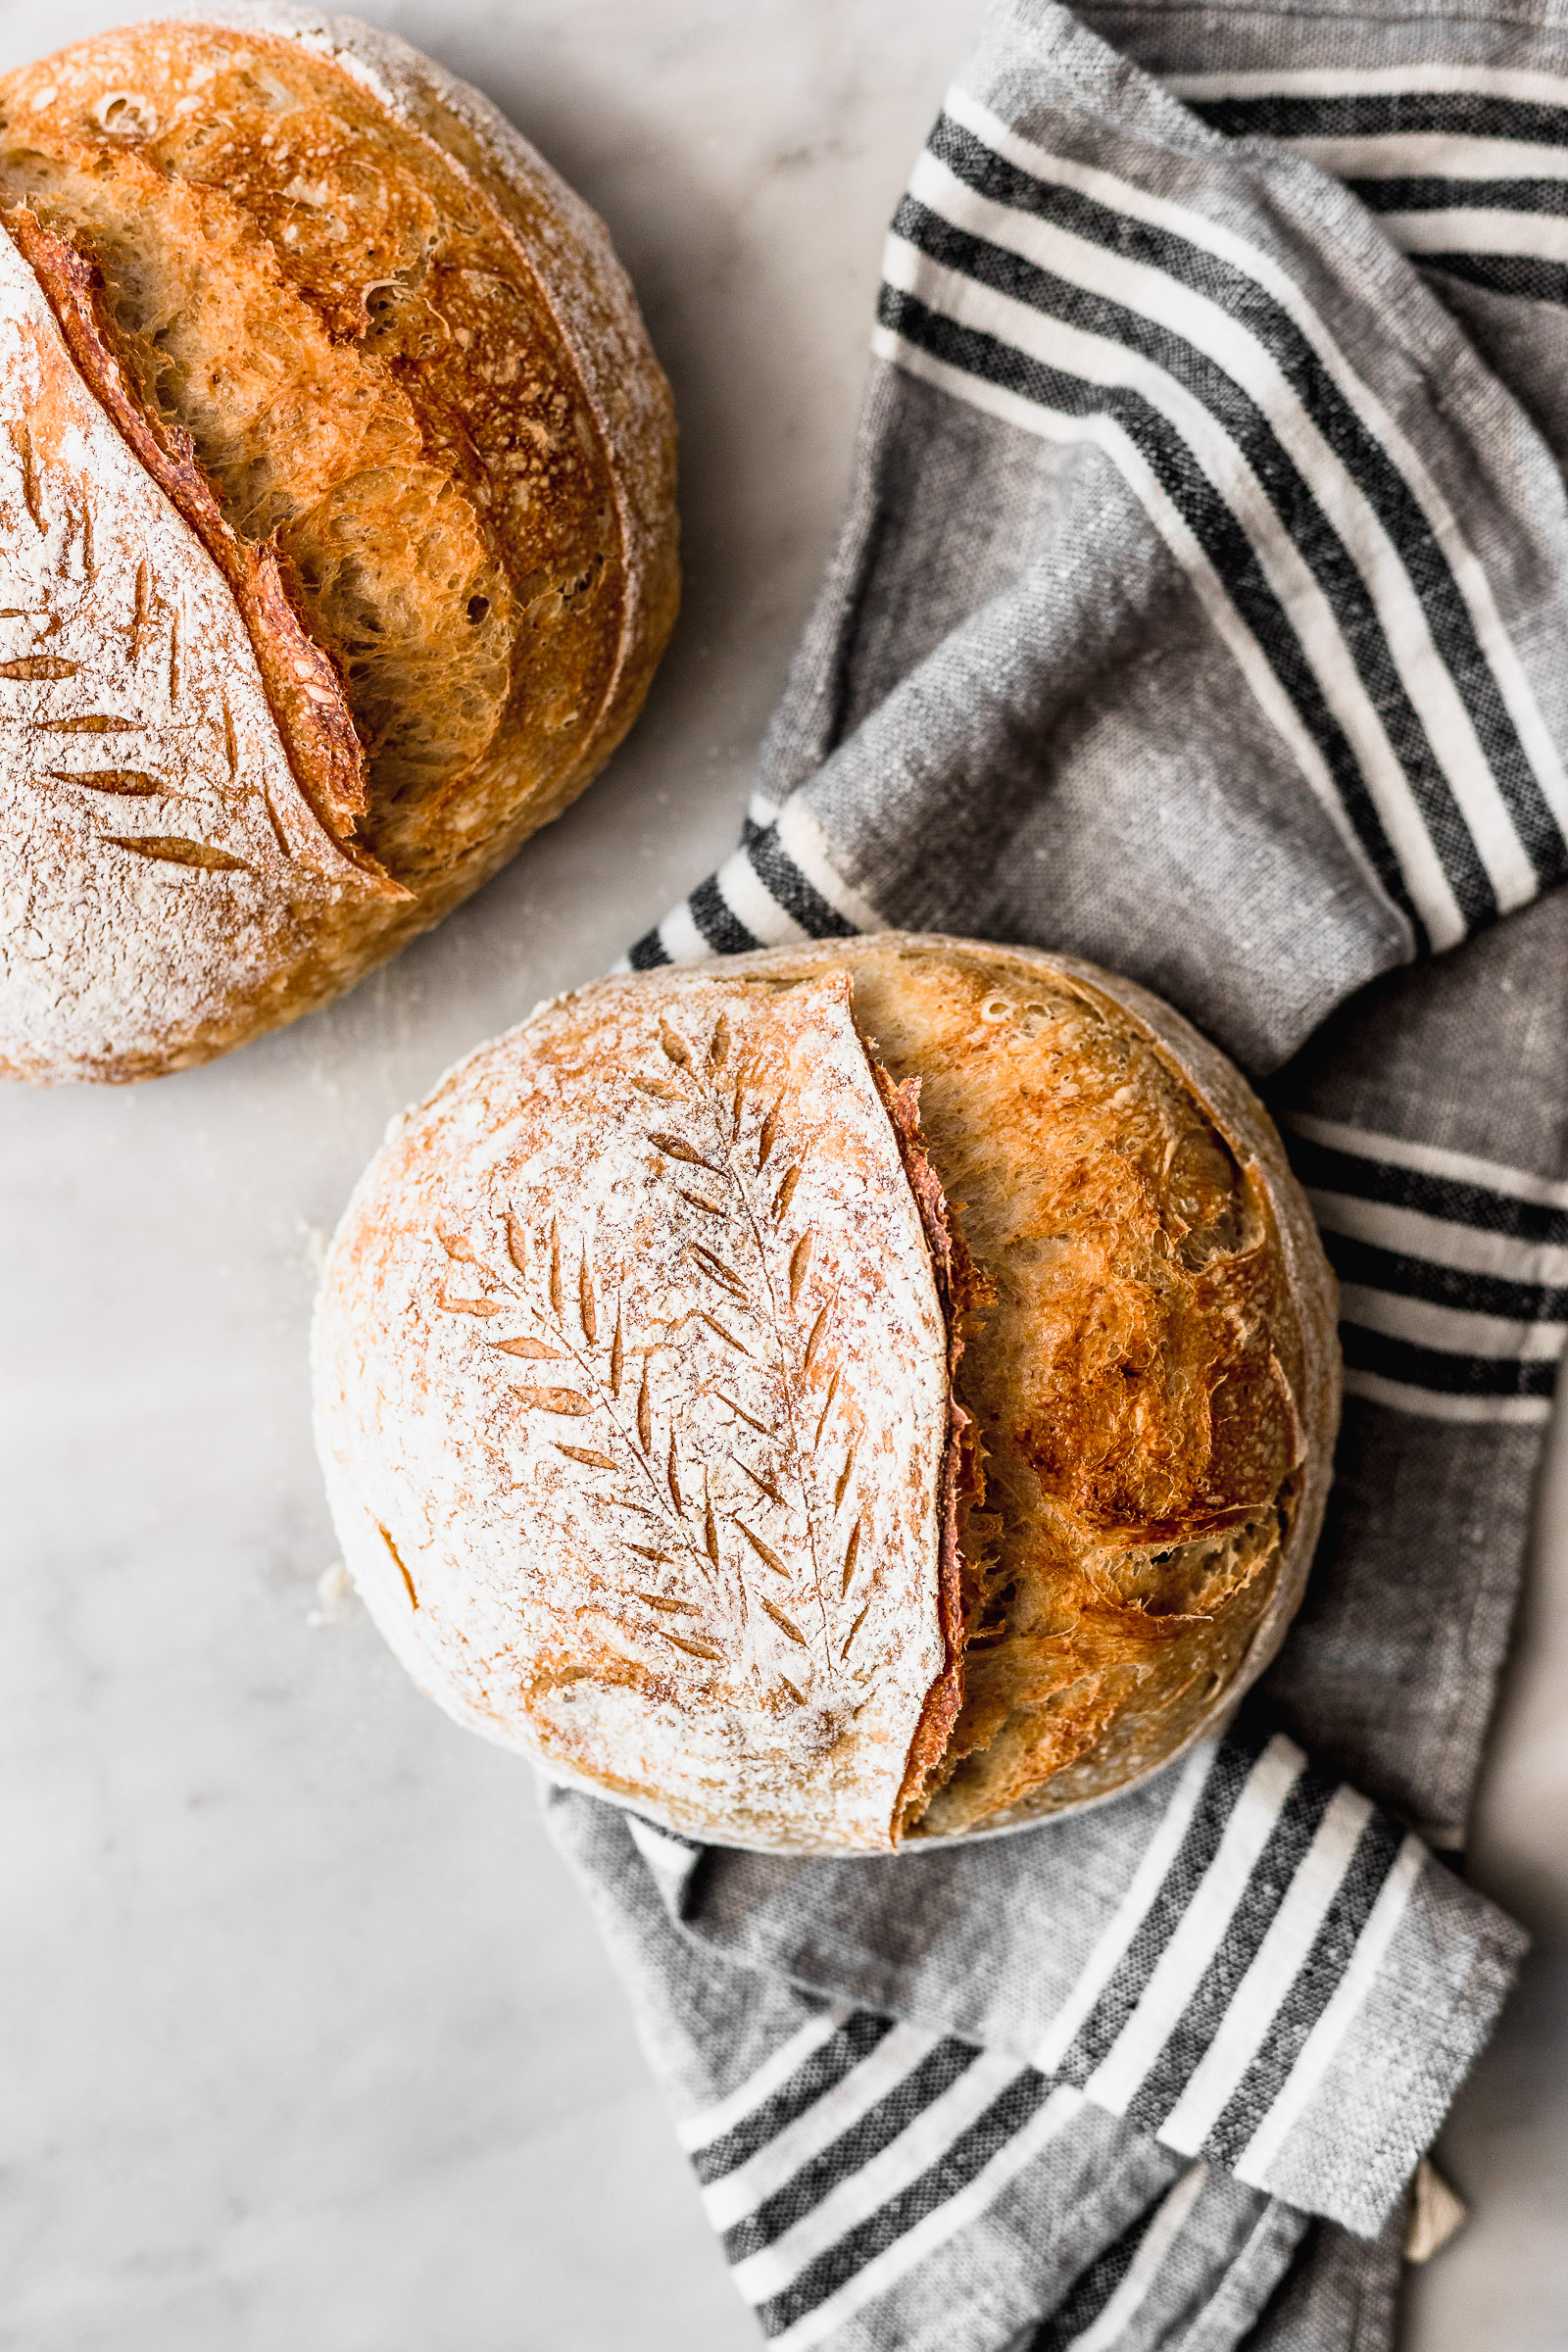 https://cravingsjournal.com/wp-content/uploads/2020/05/how-to-bake-bread-in-a-dutch-oven-10.jpg